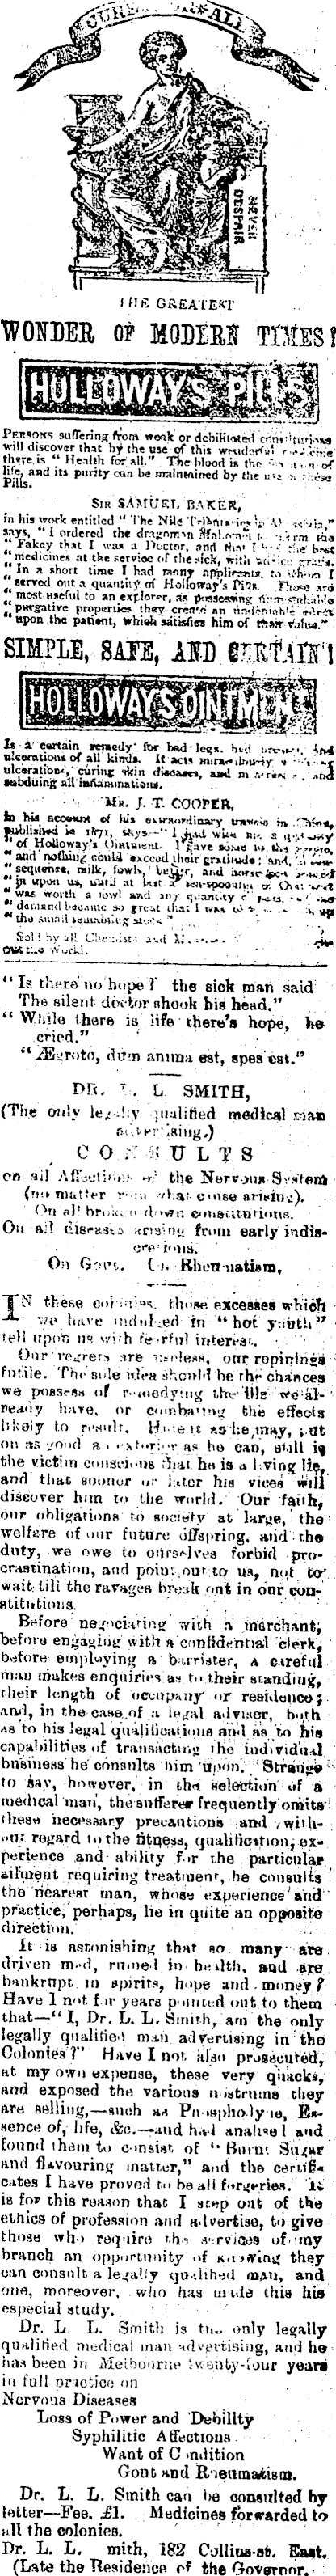 Papers Past Newspapers Kumara Times 21 October 1878 Page 4 Advertisements Column 4